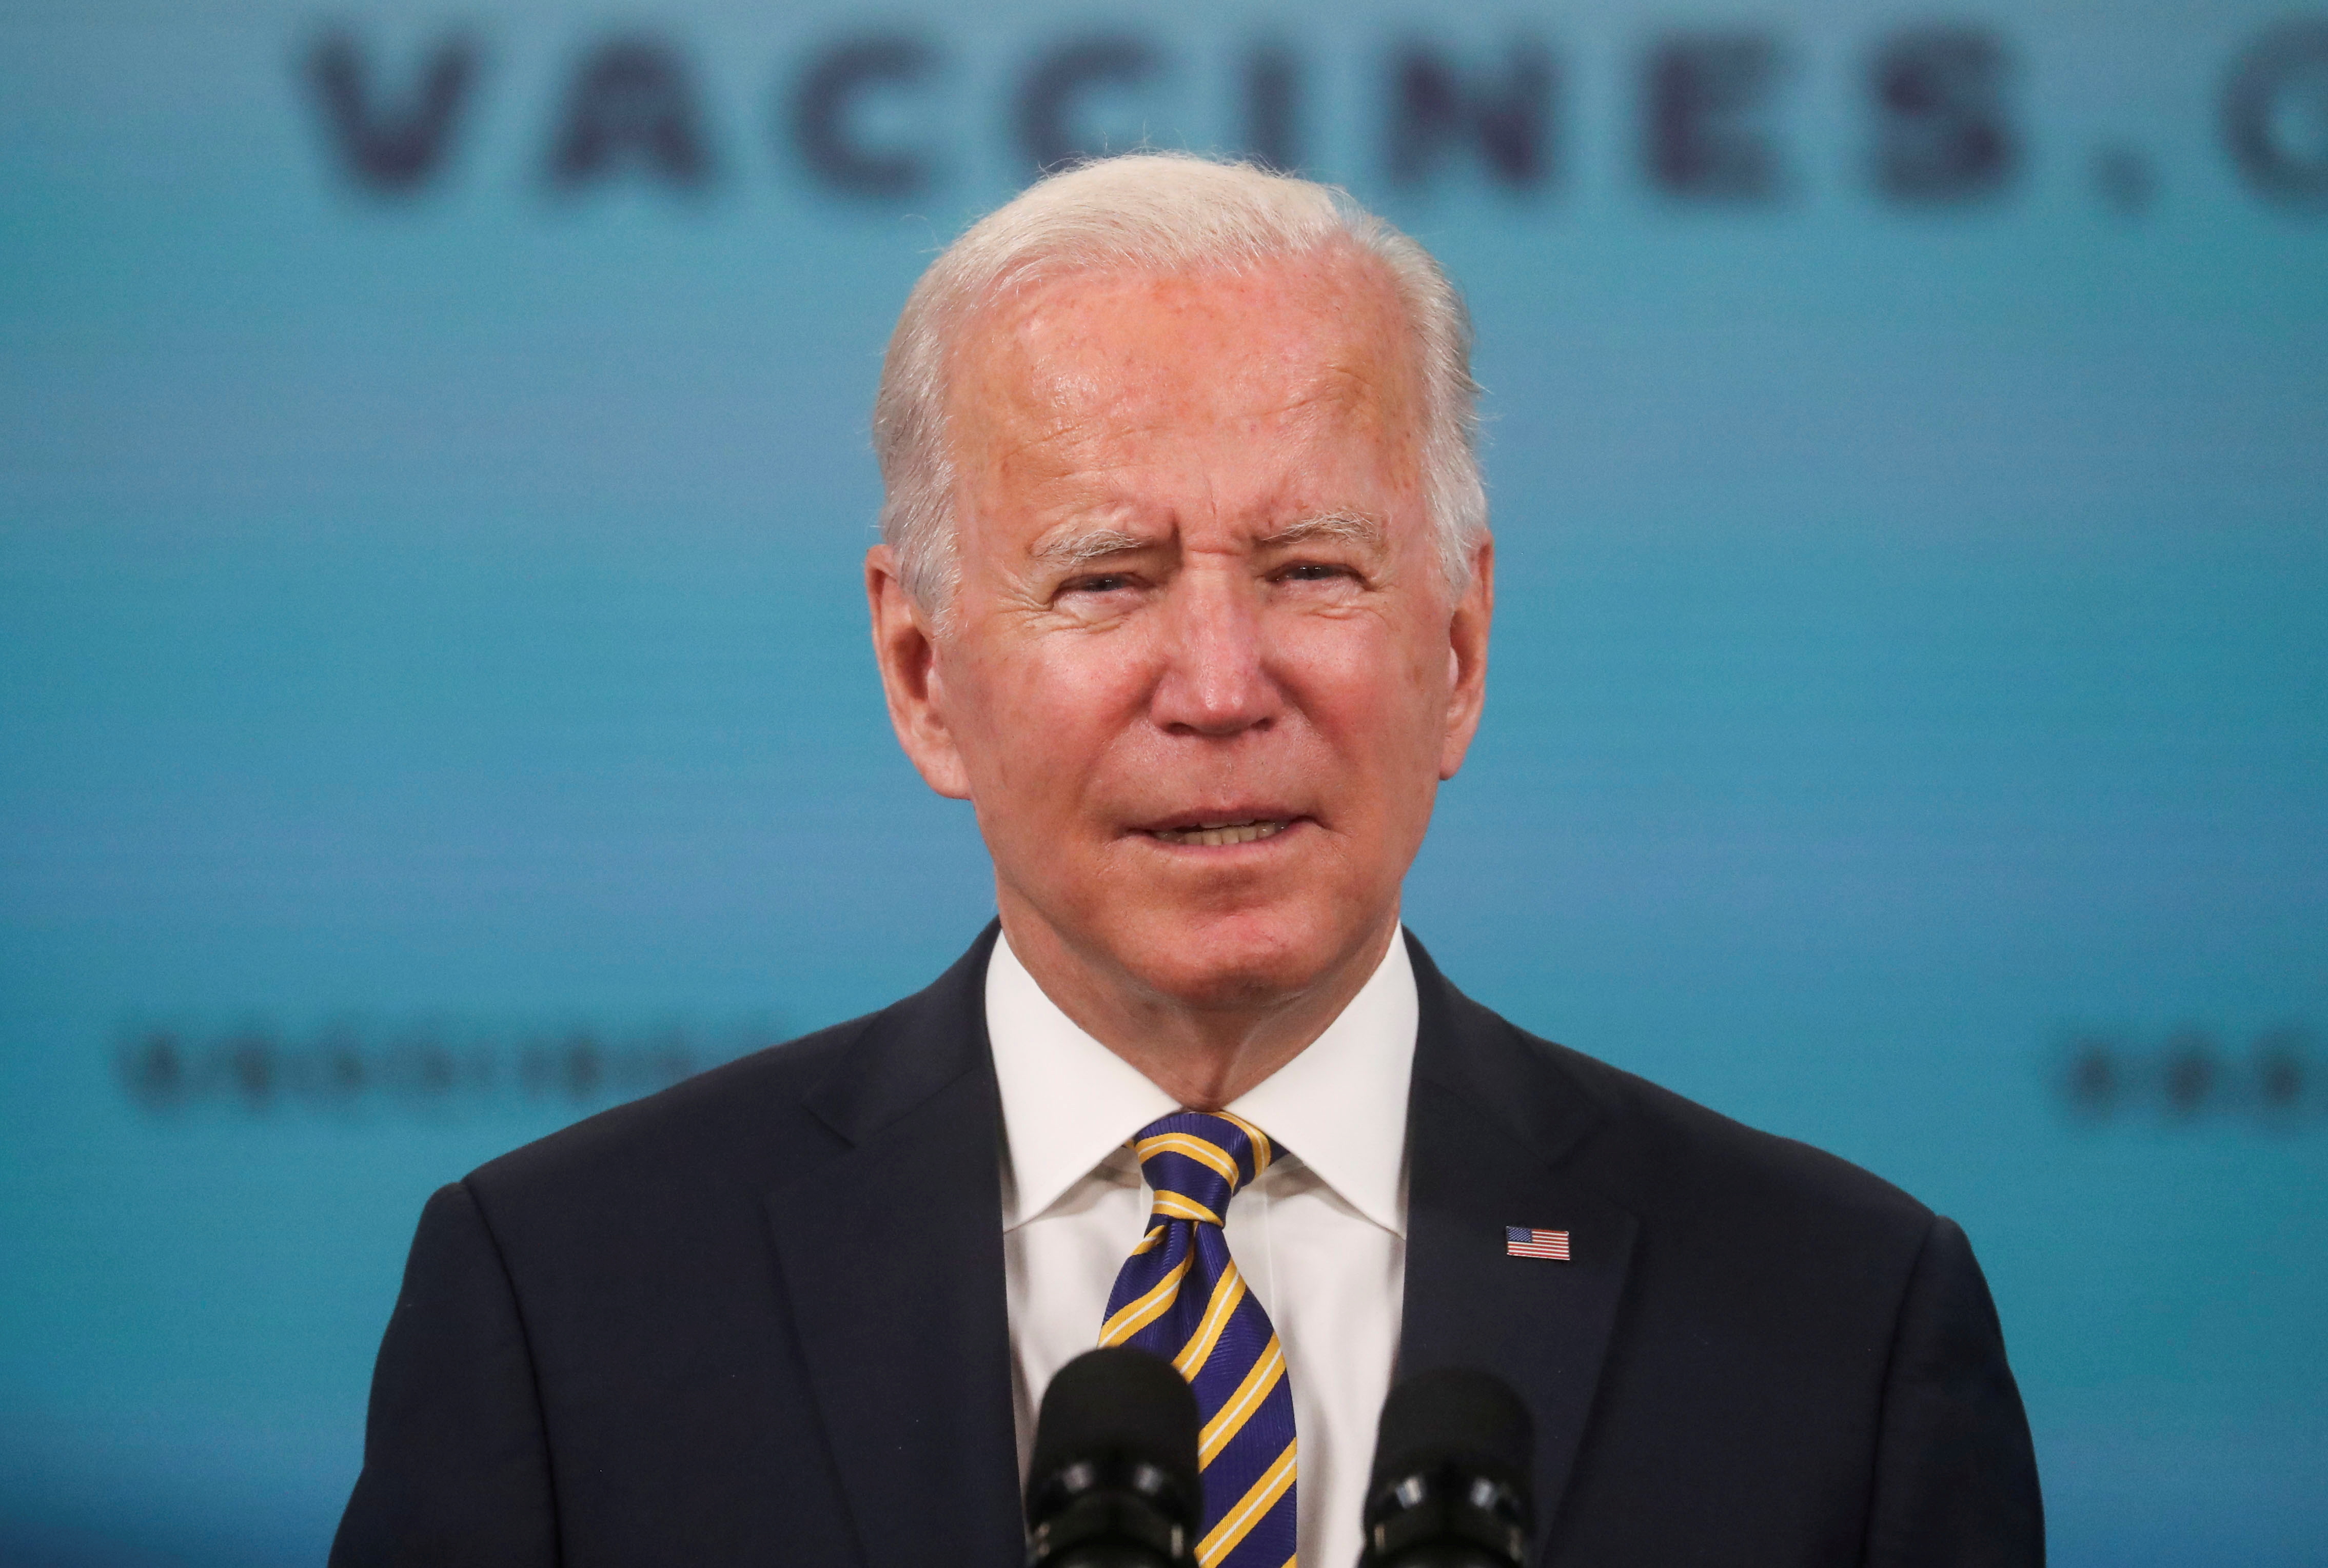 U.S. President Joe Biden delivers an update on the administration's coronavirus disease (COVID-19) response and the vaccination program during remarks at the White House in Washington, U.S., October 14, 2021. REUTERS/Leah Millis